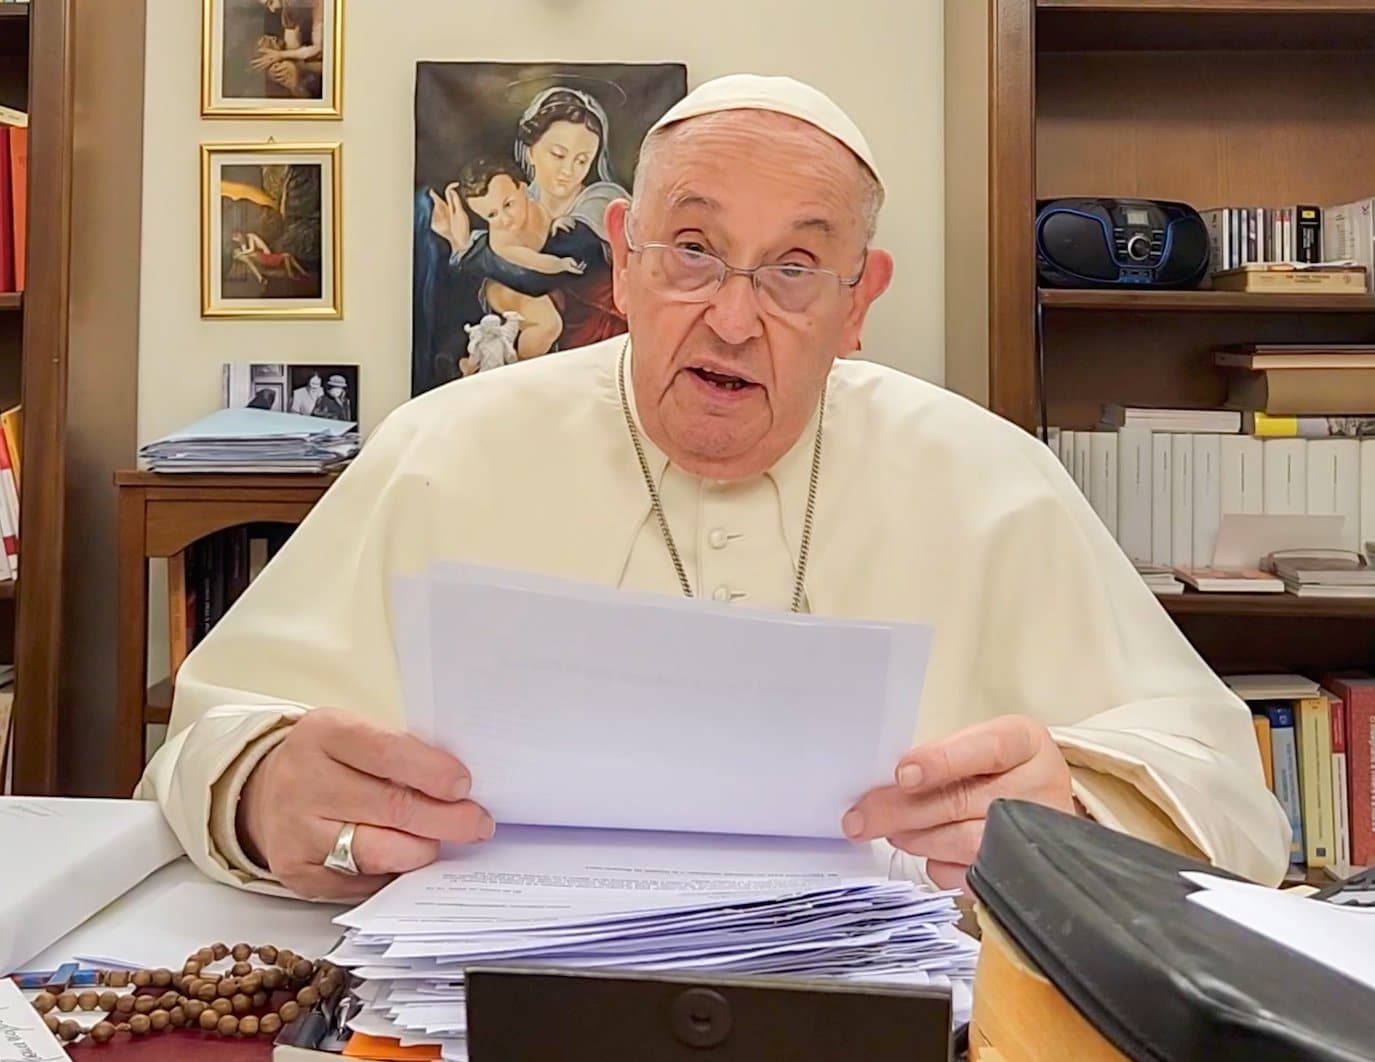 POPE FRANCIS VIDEO MESSAGE